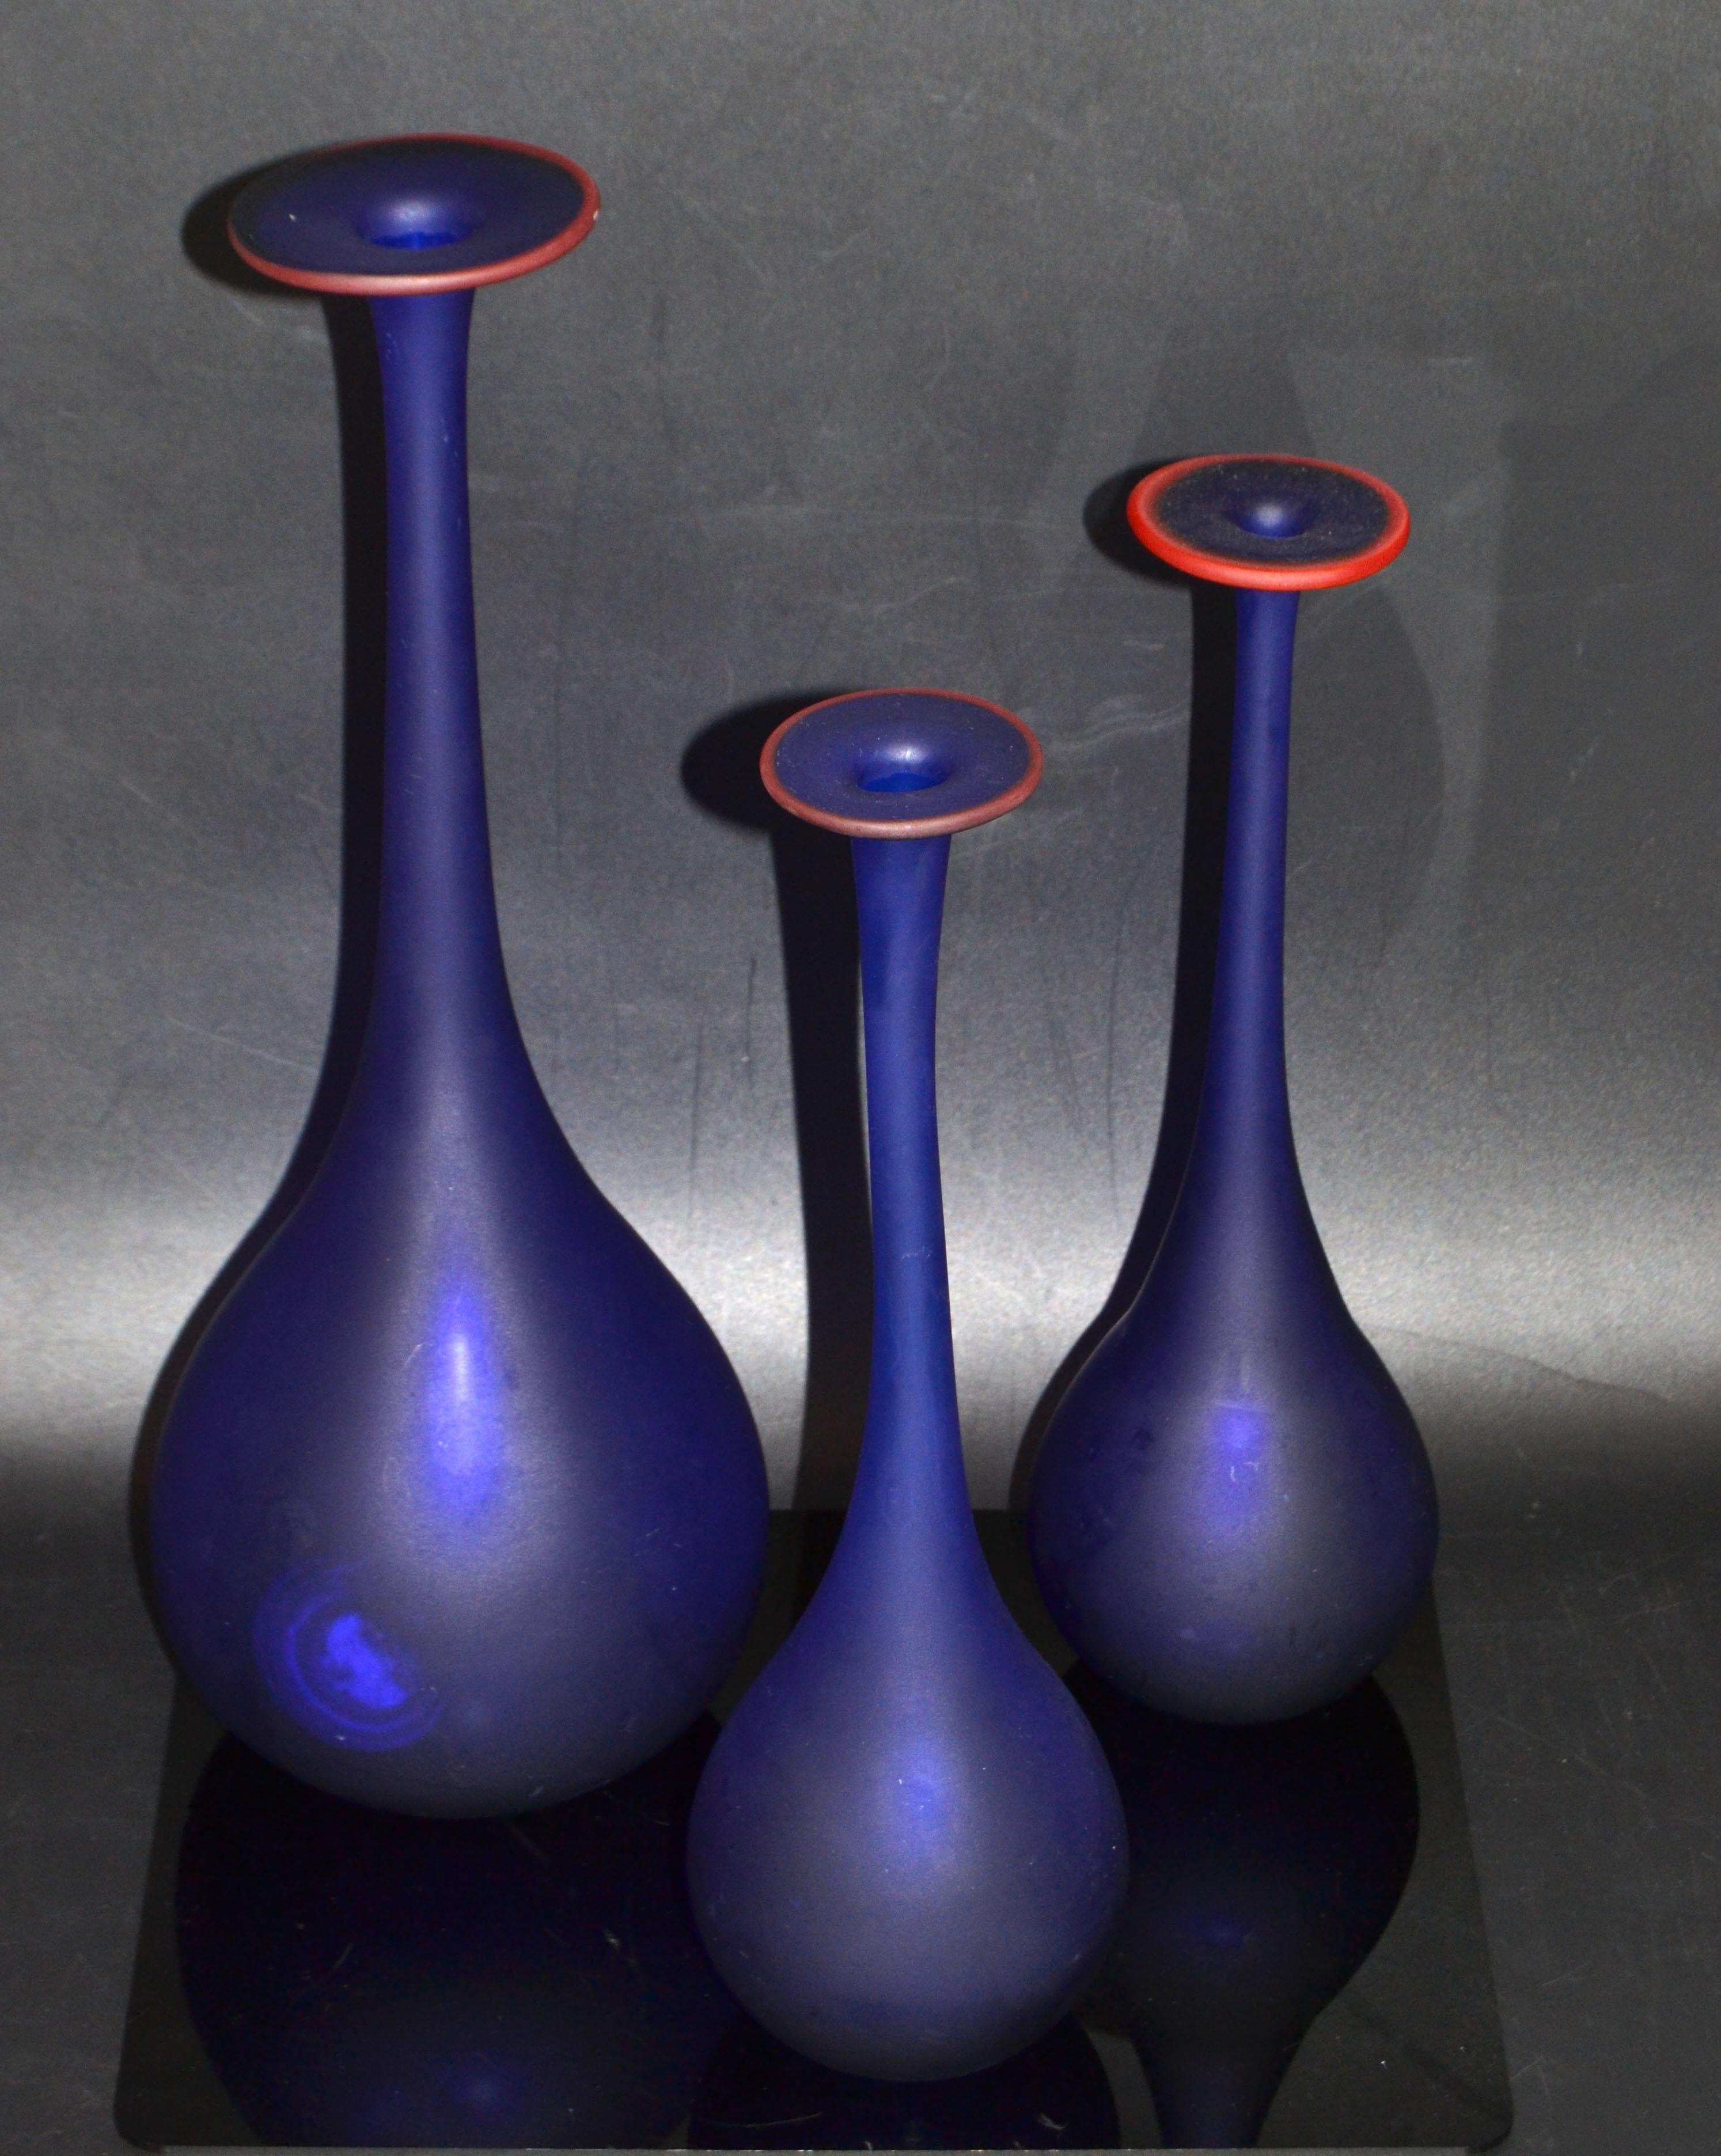 20th Century 3 Nesting Vases Moretti Style Translucent Blue & Red Satin Glass Bud Vases Italy For Sale